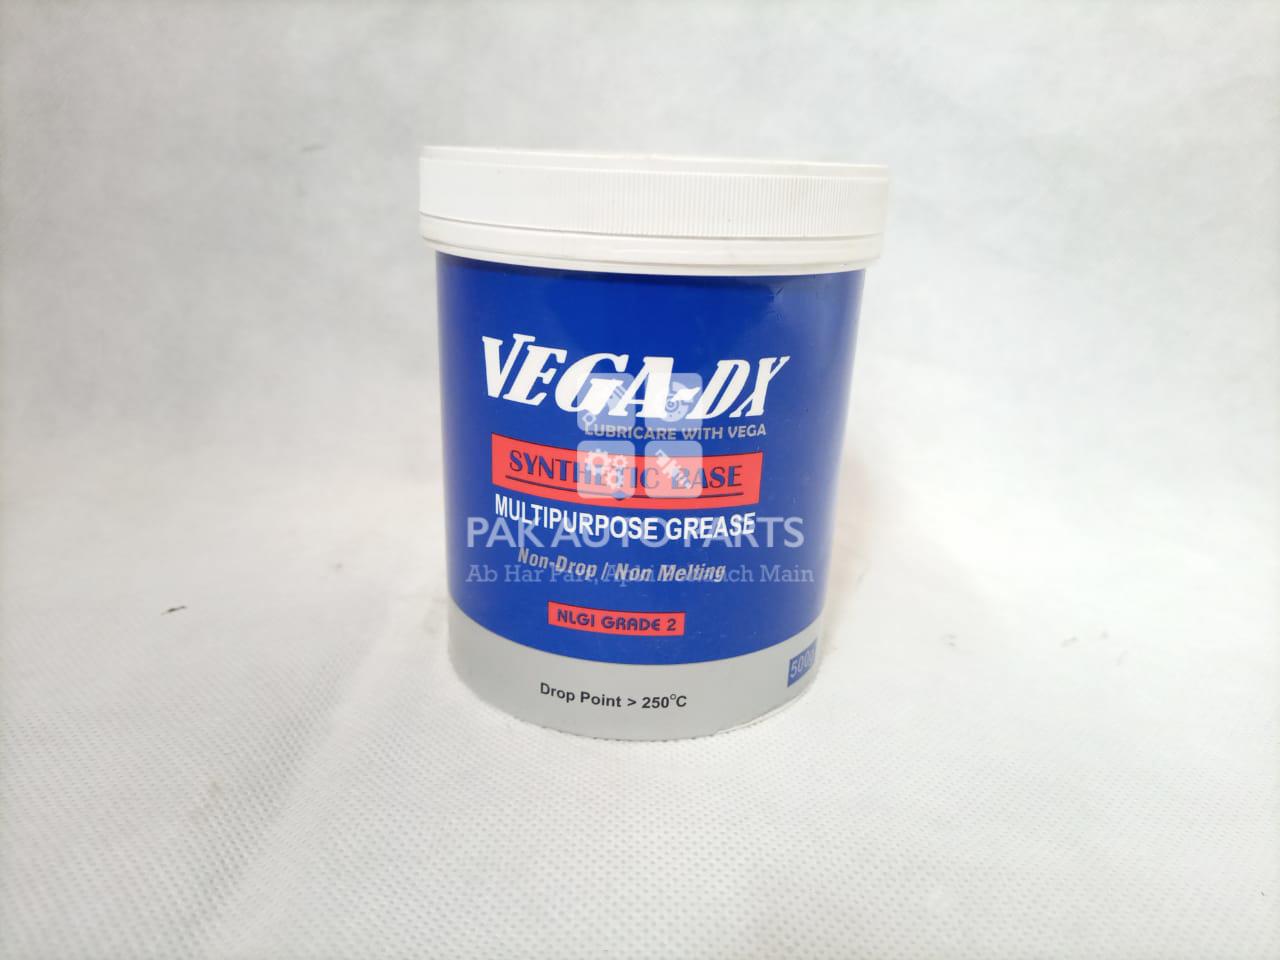 Picture of VEGA-DX Multipurpose Grease (500g)